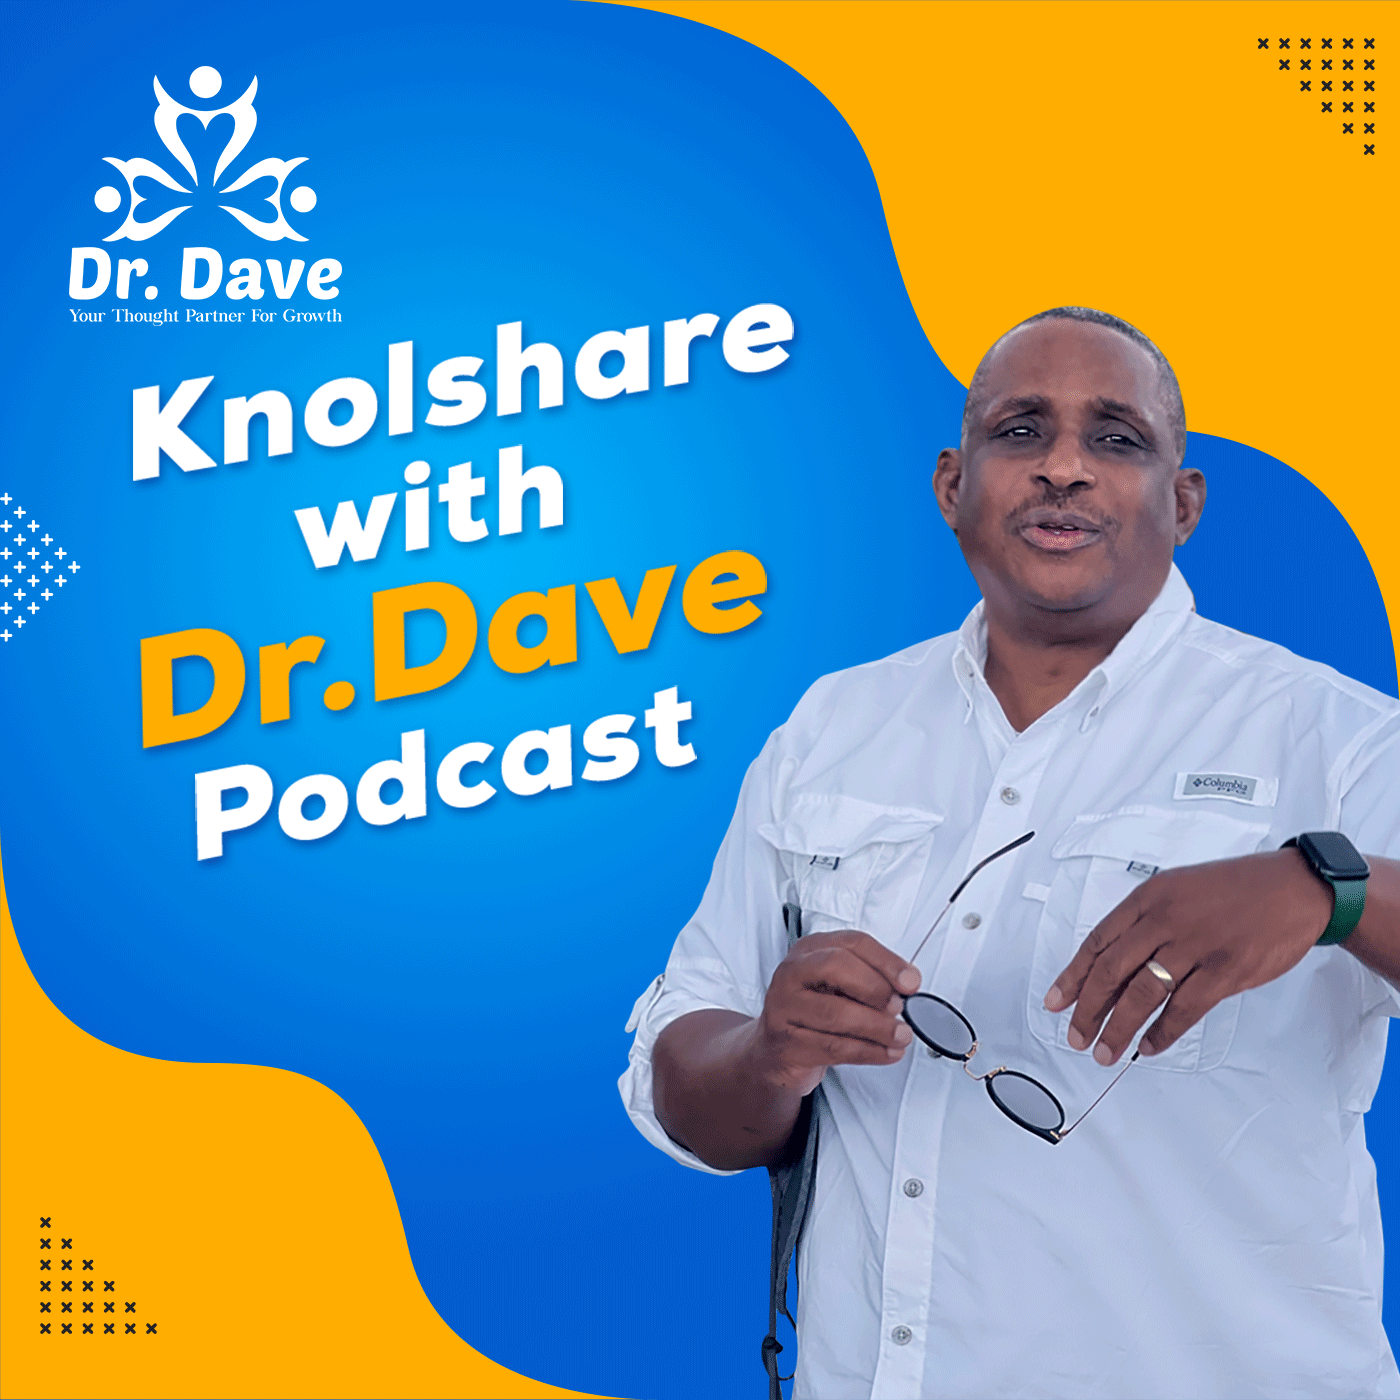 KnolShare with Dr. Dave Podcast